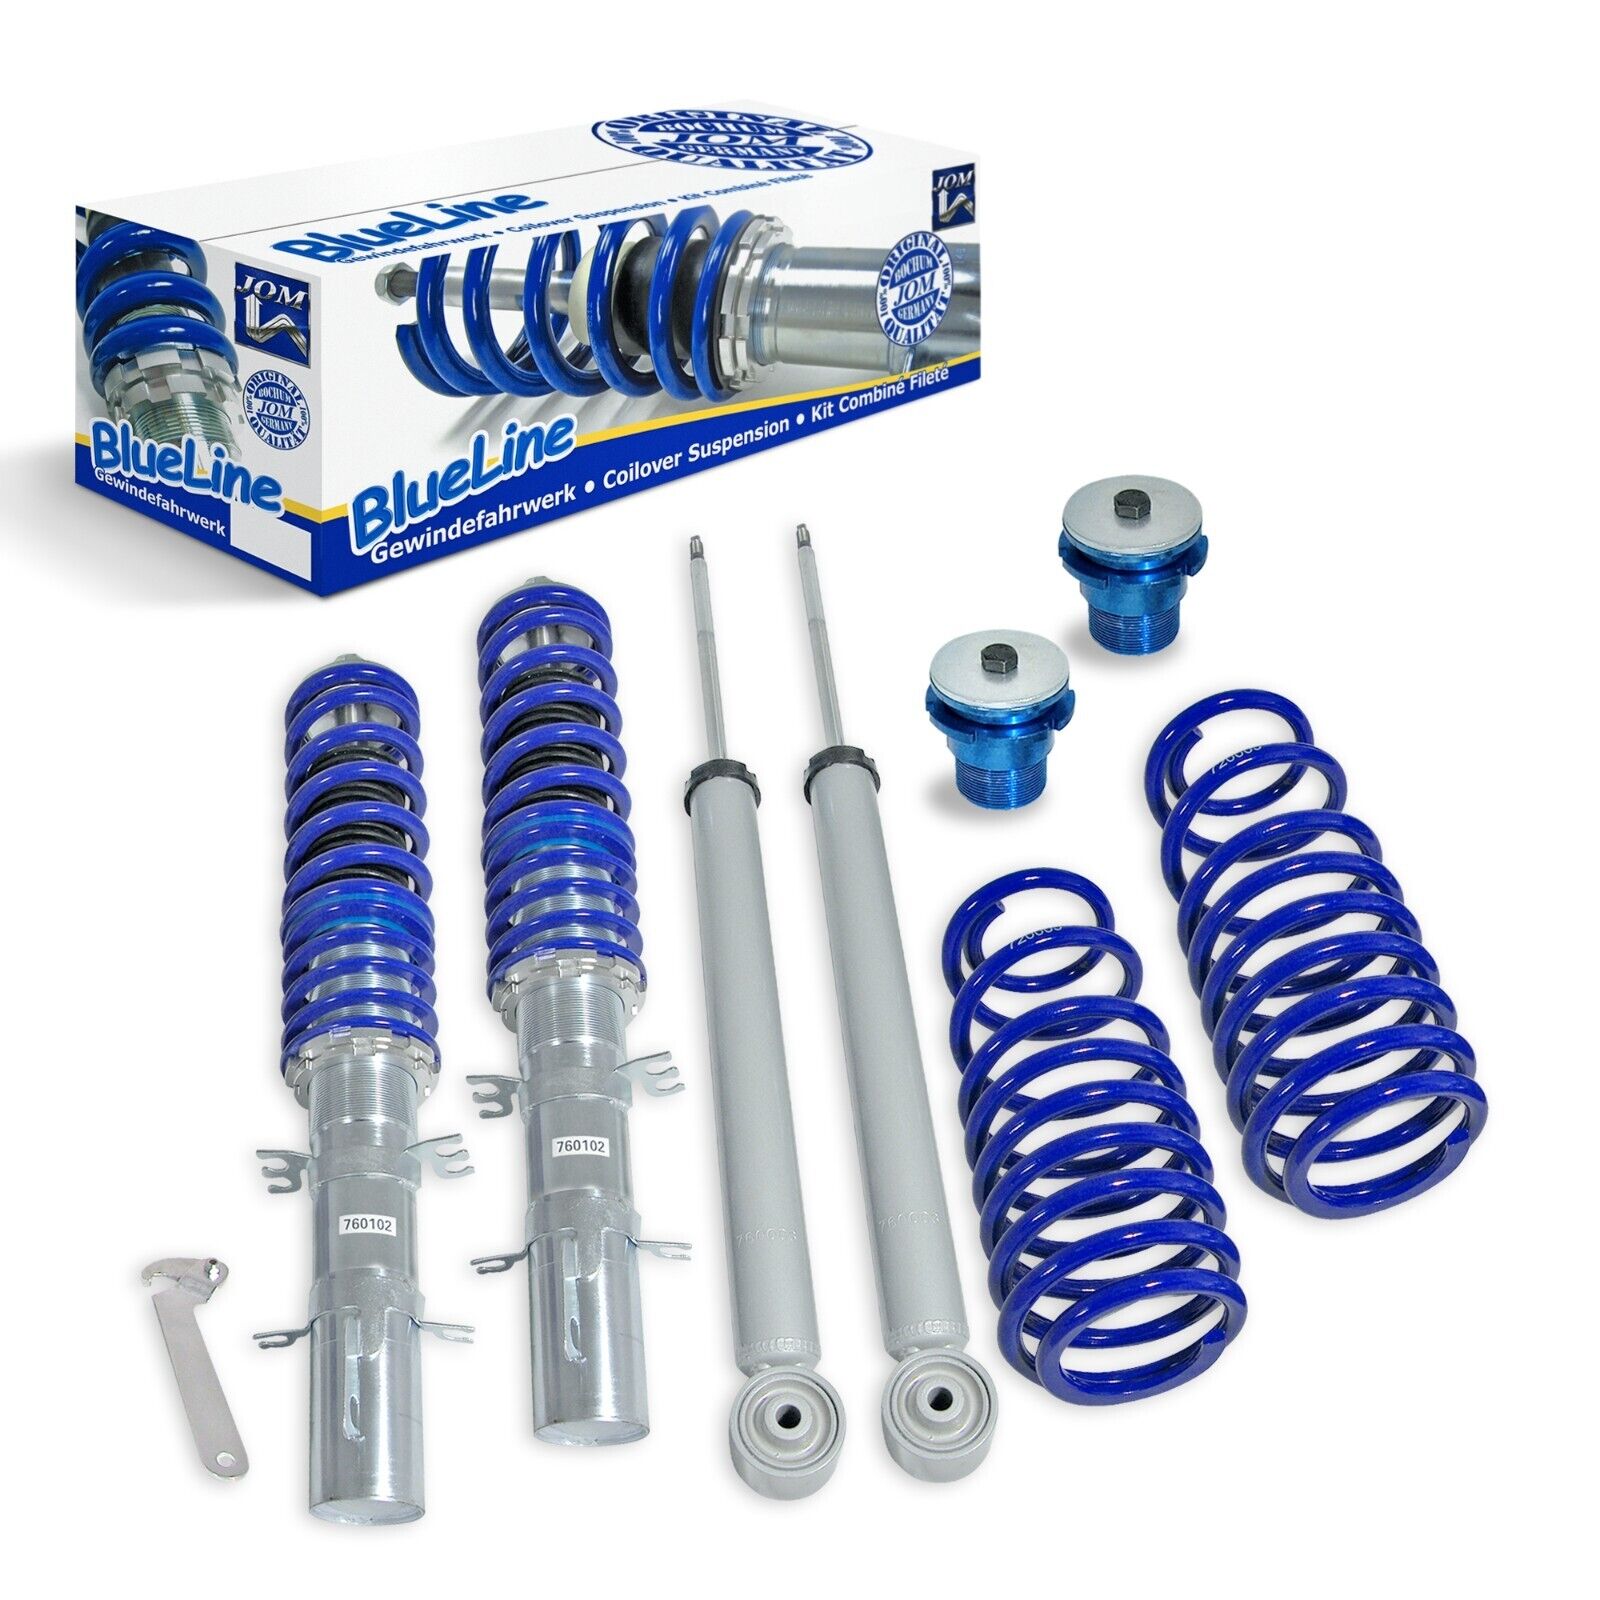 JOM Blueline Lowering Coilovers Audi A3 8L 1.6 1.8 1.8T 1.9TDi 96-03 NOT 4WD